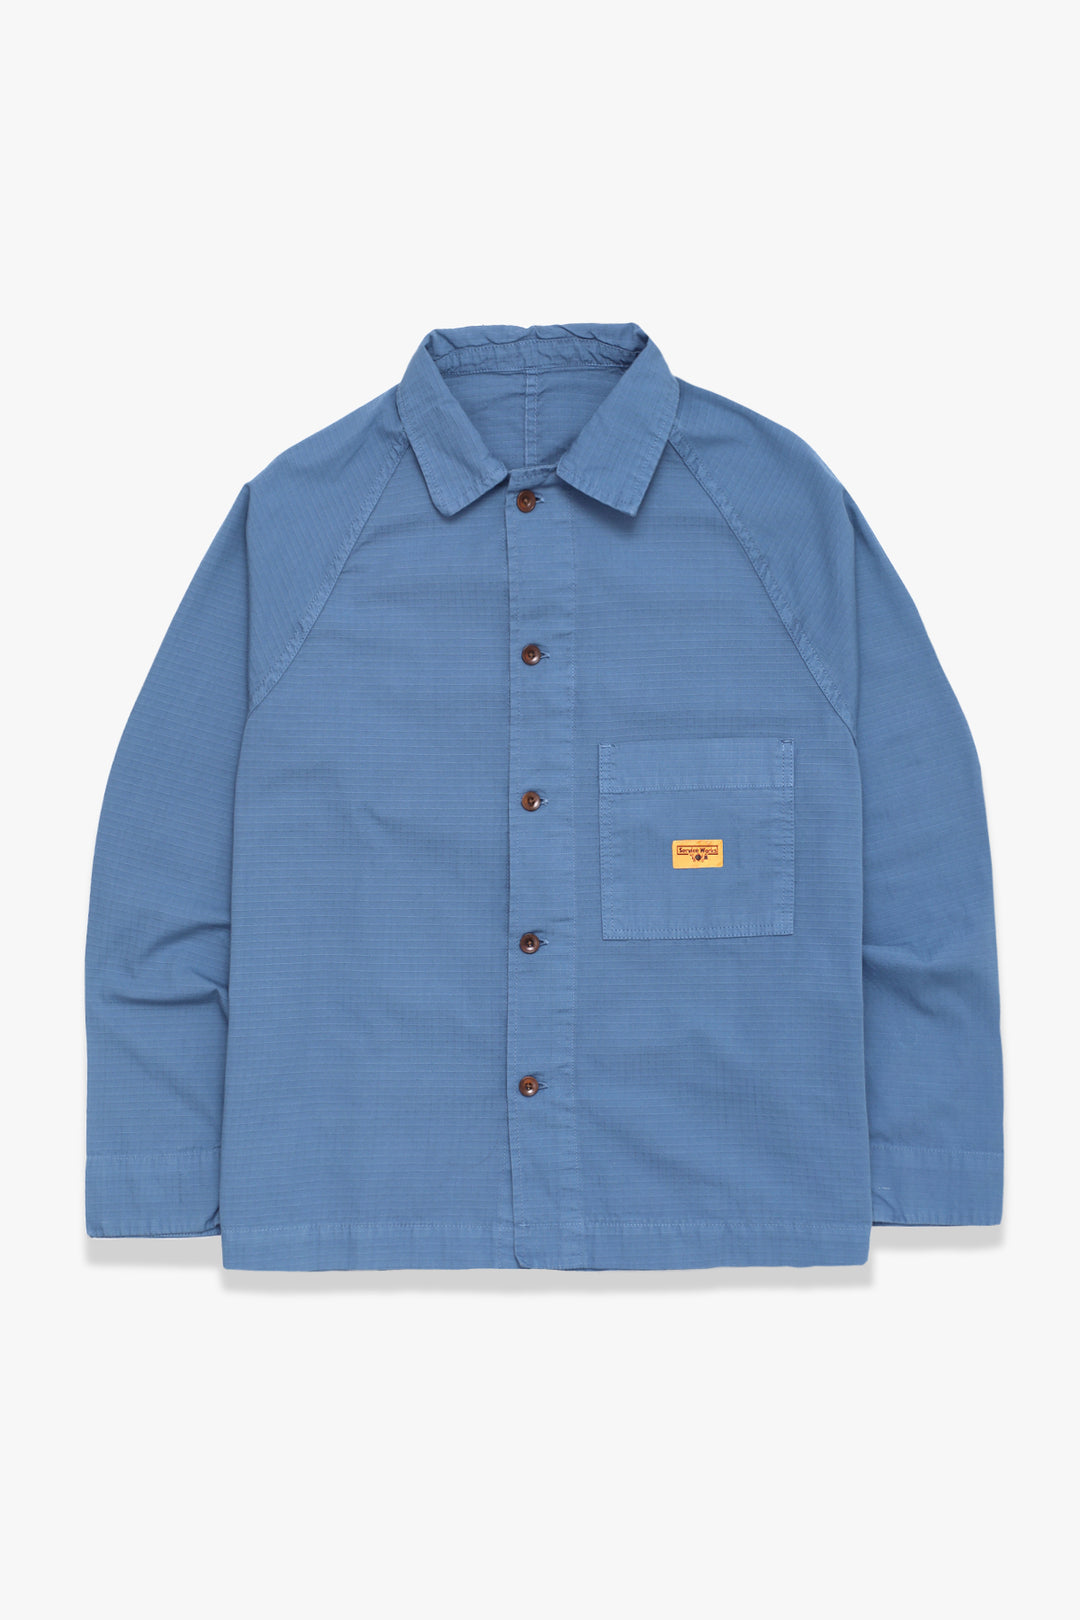 Service Works - Ripstop Front Of House Jacket - Work Blue